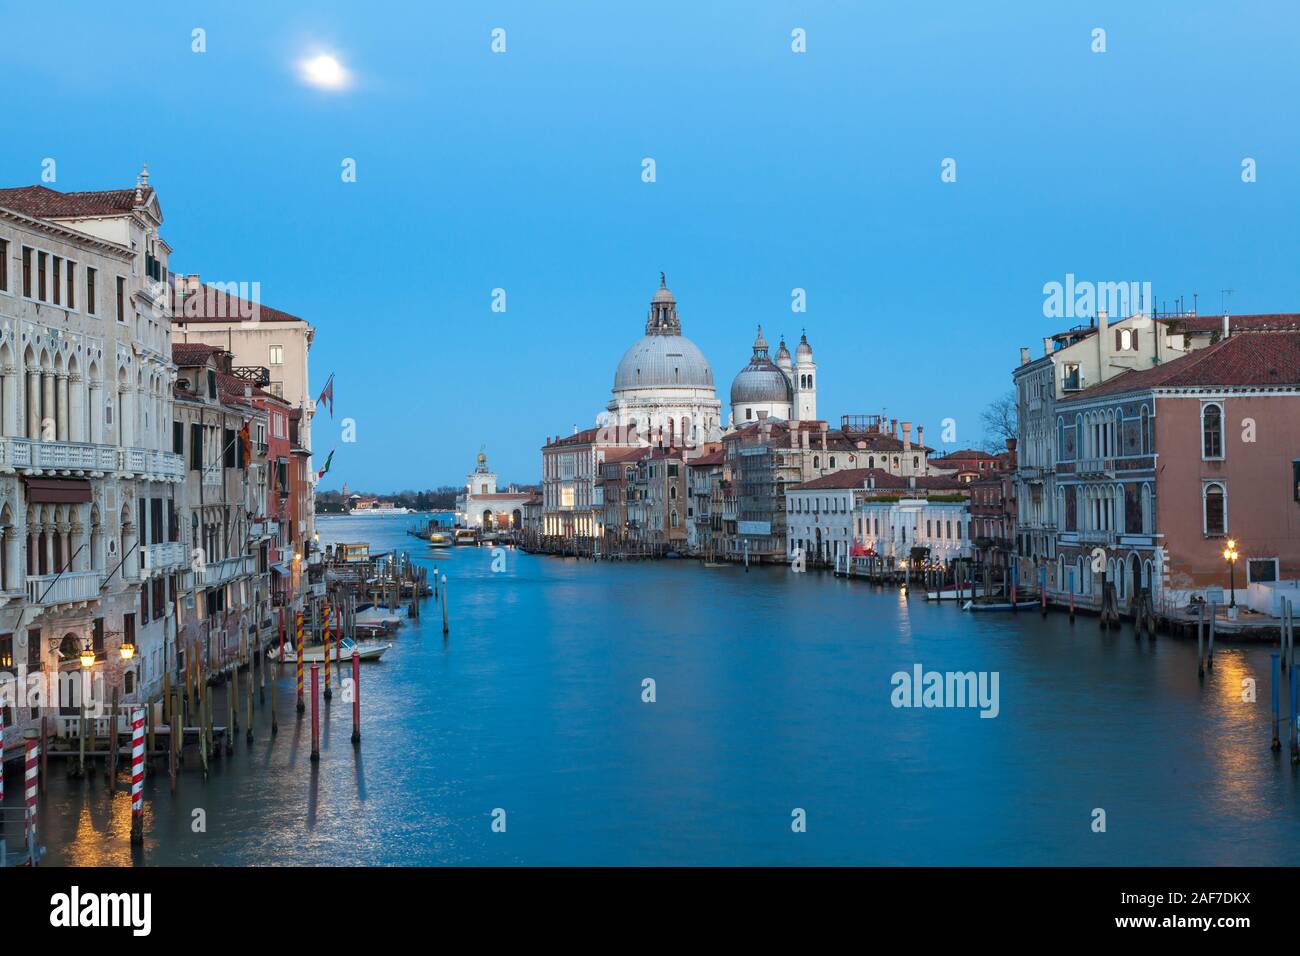 Full moon over the Grand Canal, Venice, Veneto, Italy at twilightwith reflection on the water and view to Basilica Santa Maria della Salute Stock Photo